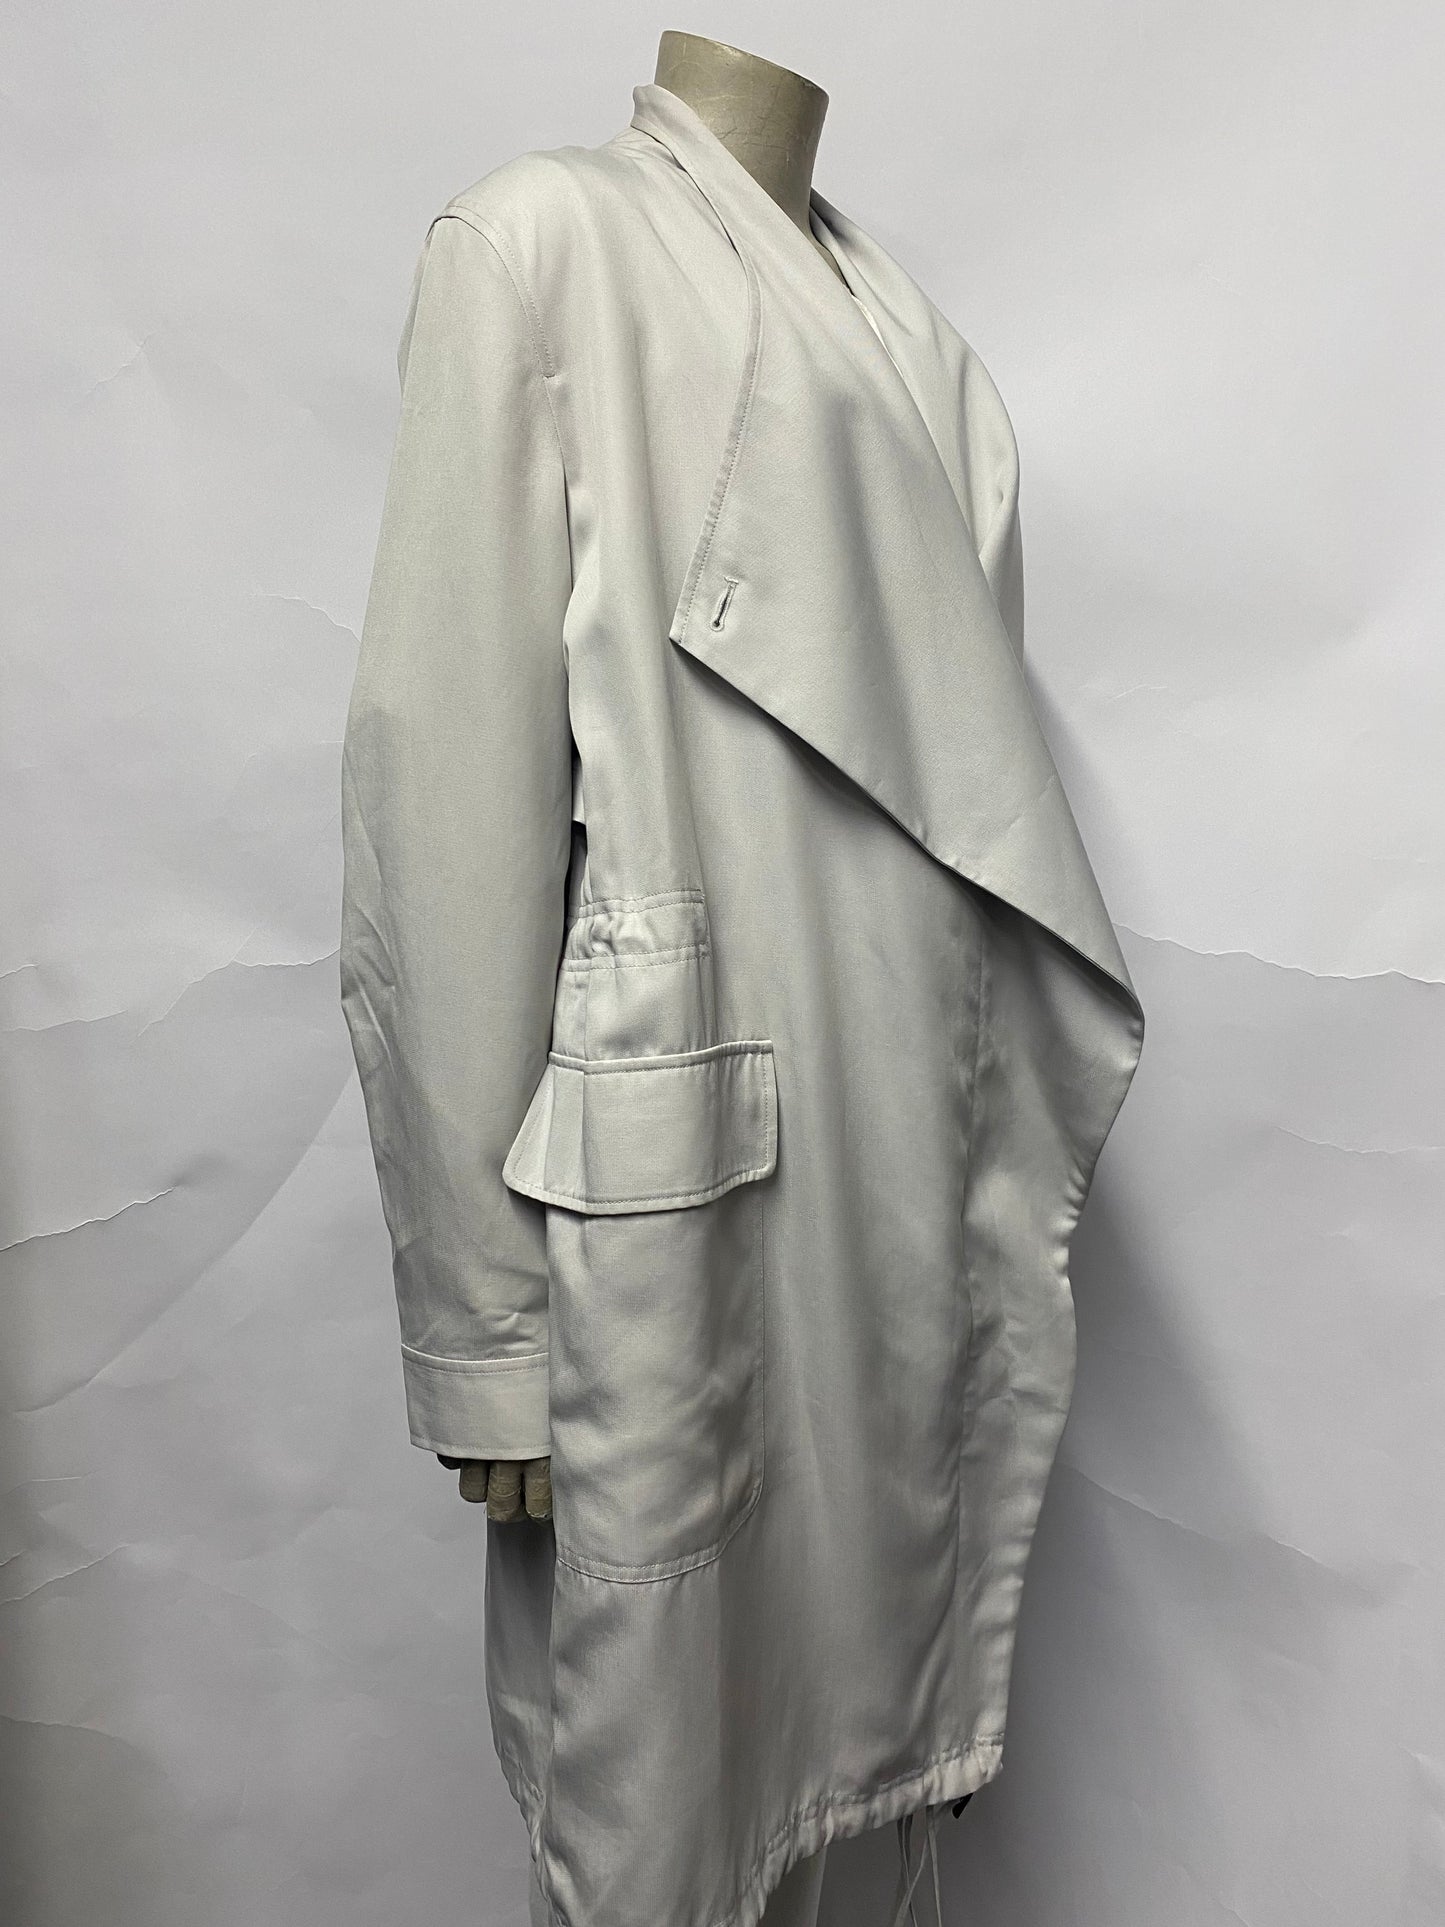 French Connection Grey Waterfall Style Trench Coat 10